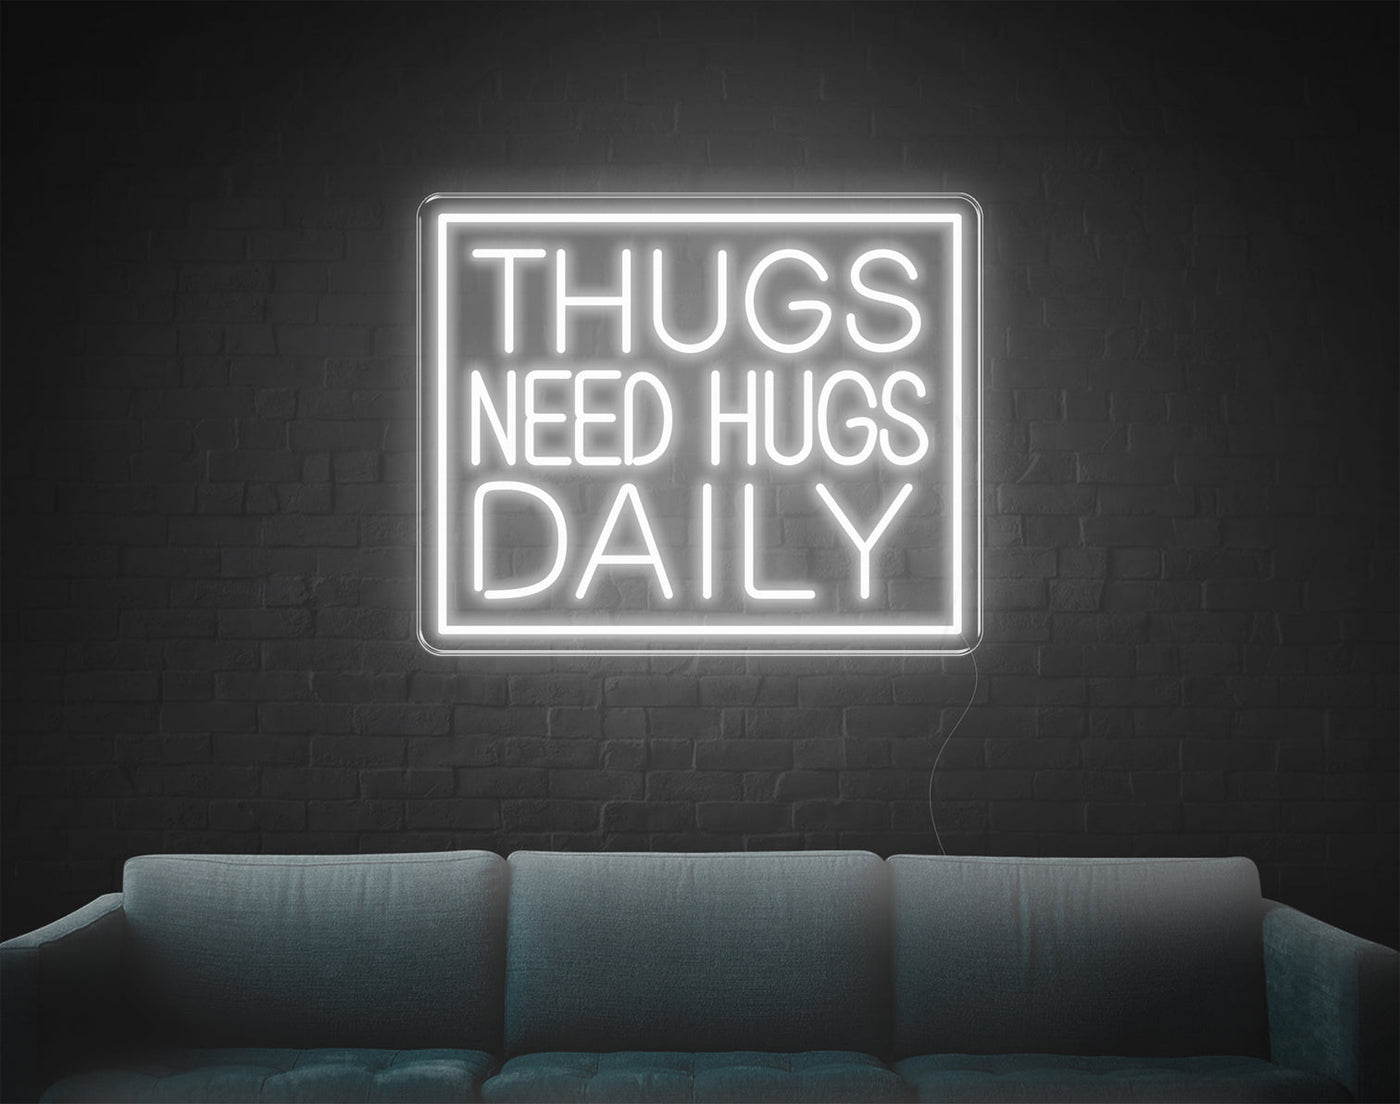 Thugs Need Hugs Daily LED Neon Sign - 18inch x 22inchHot Pink